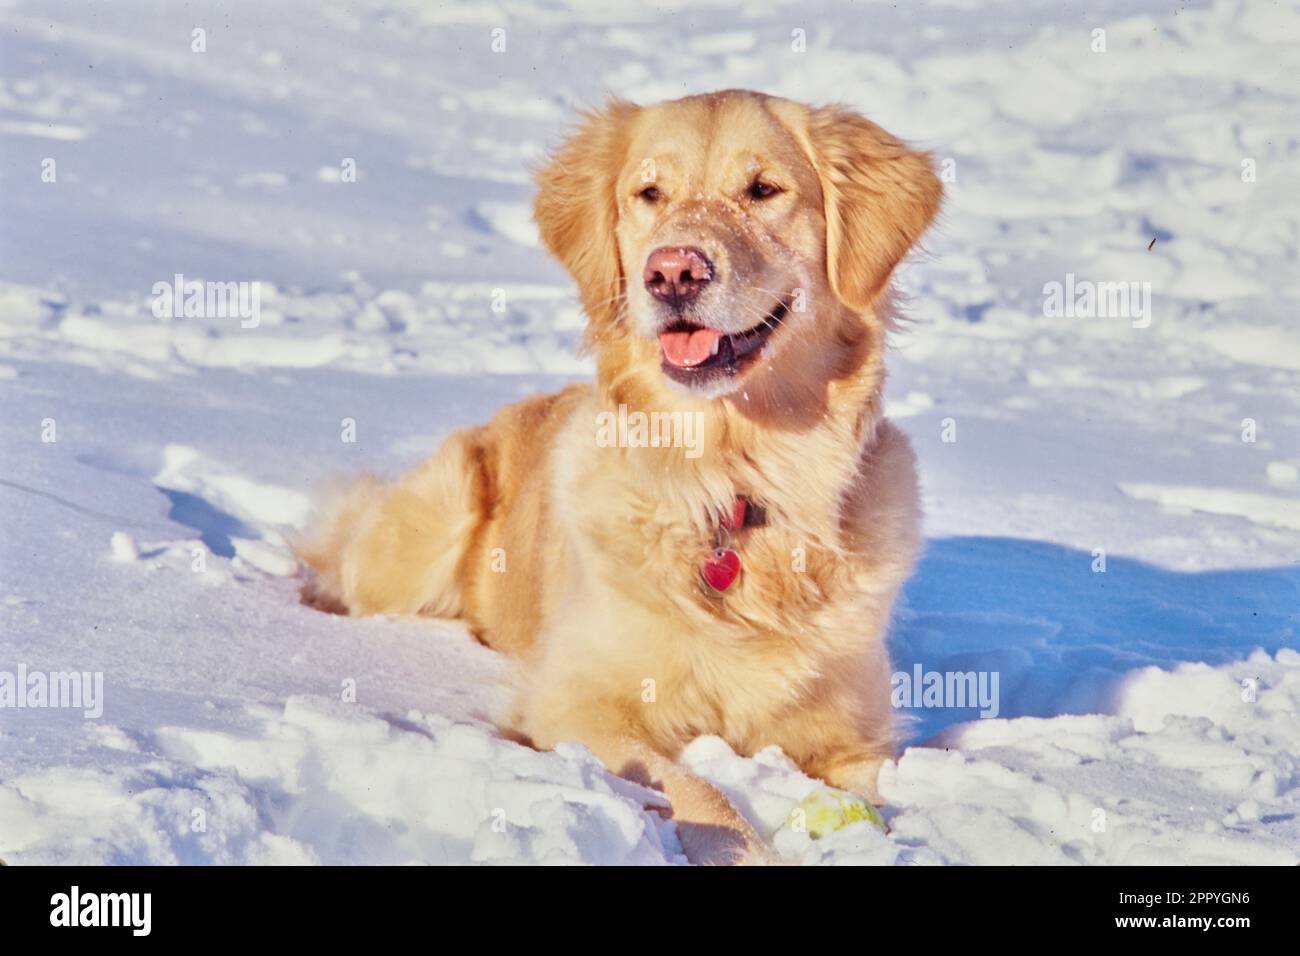 Golden retriever laying down in winter snow outside with mouth open Stock Photo